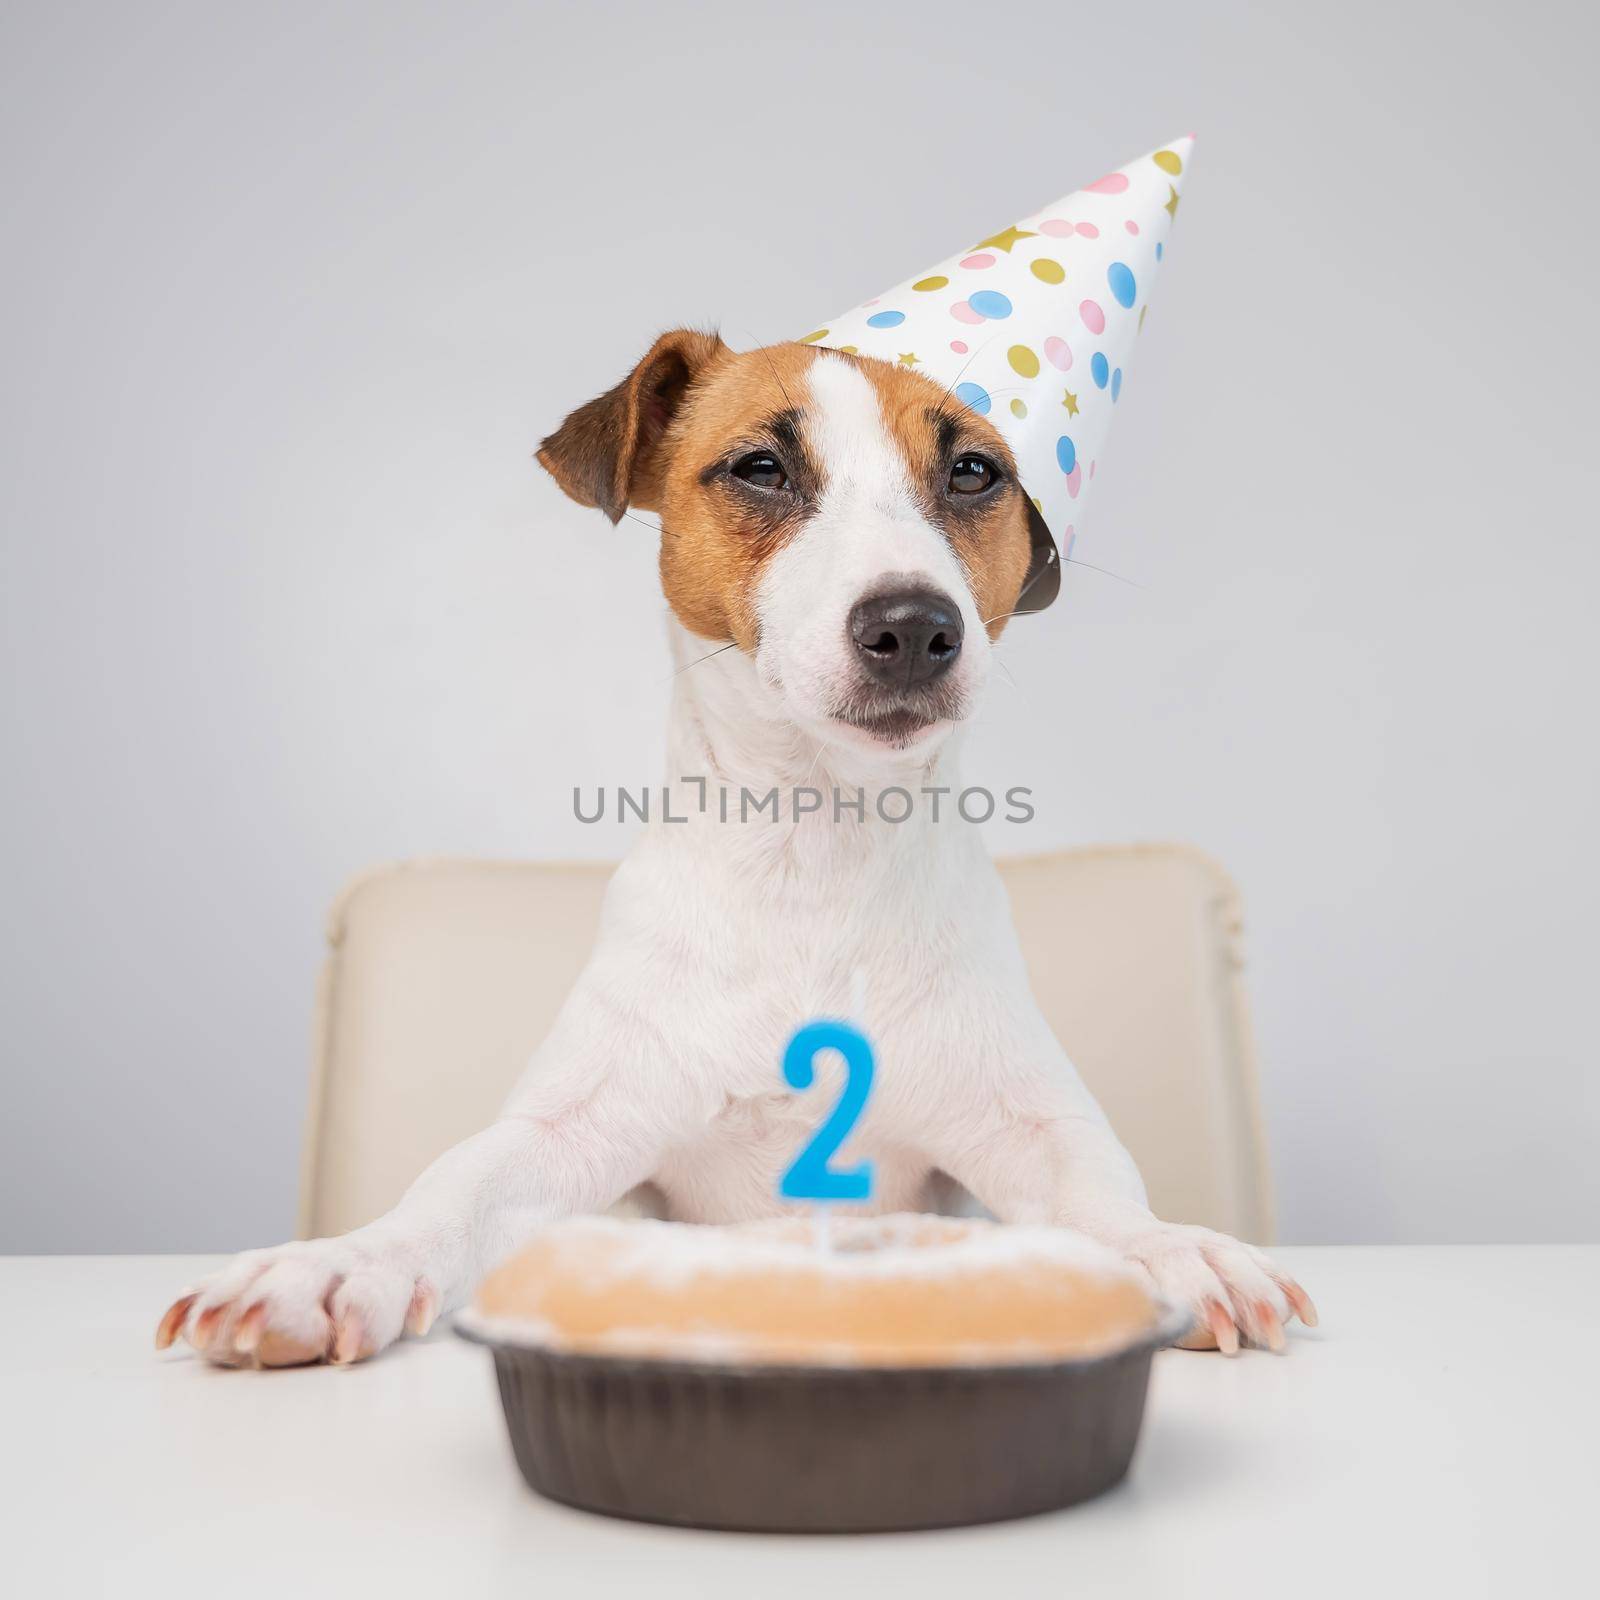 Jack russell terrier in a festive cap by a pie with a candle on a white background. The dog is celebrating its second birthday by mrwed54